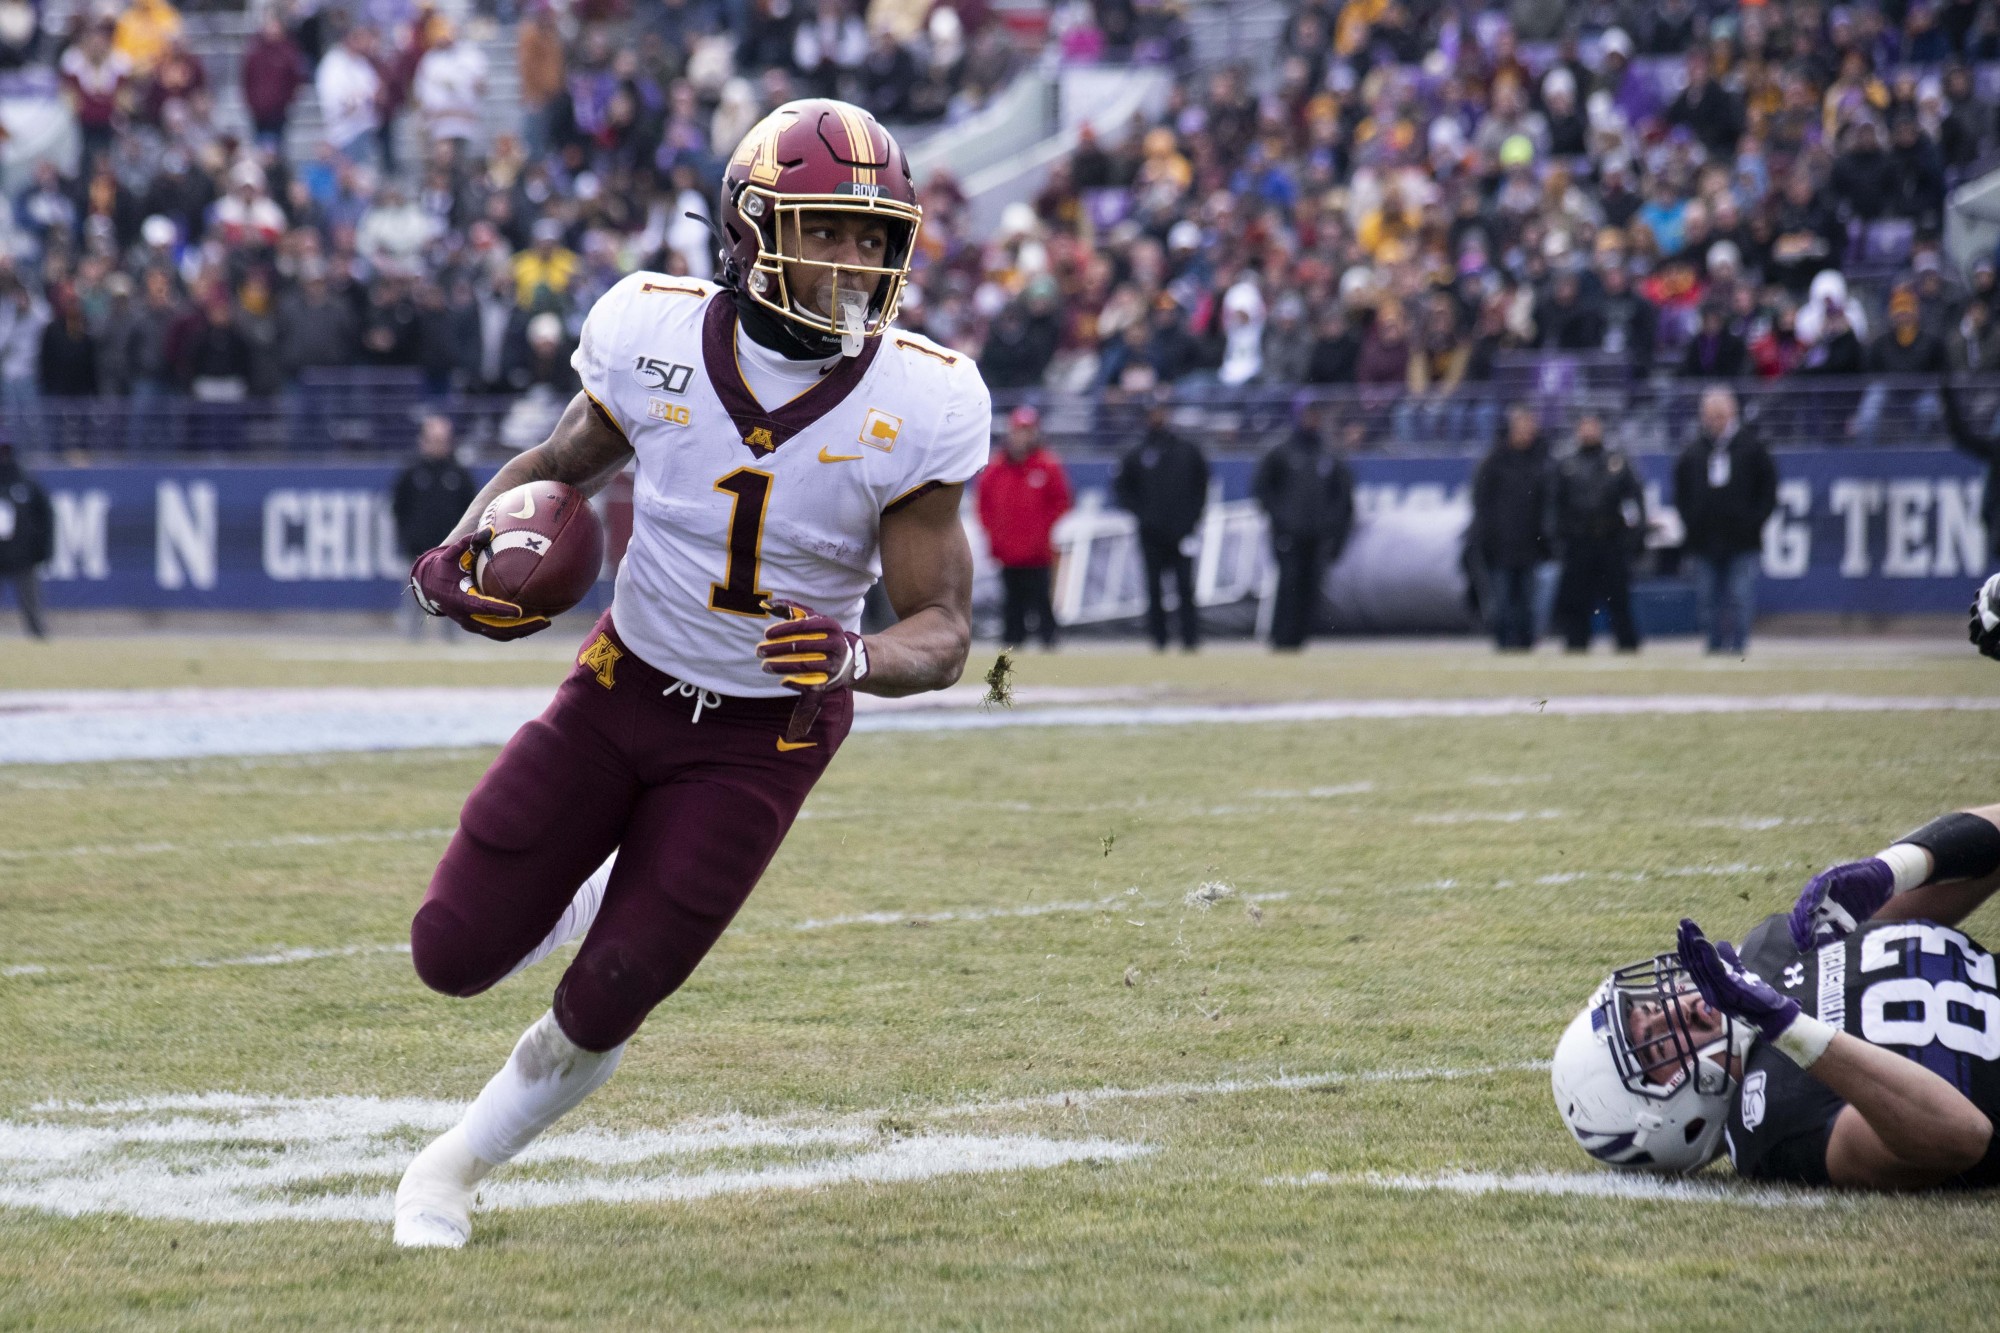 Running back Rodney Smith carries the ball at Ryan Field during the game against the Northwestern Wildcats on Saturday, Nov. 23. The Gophers earned a 38-22 victory bringing their record to 10-1. 